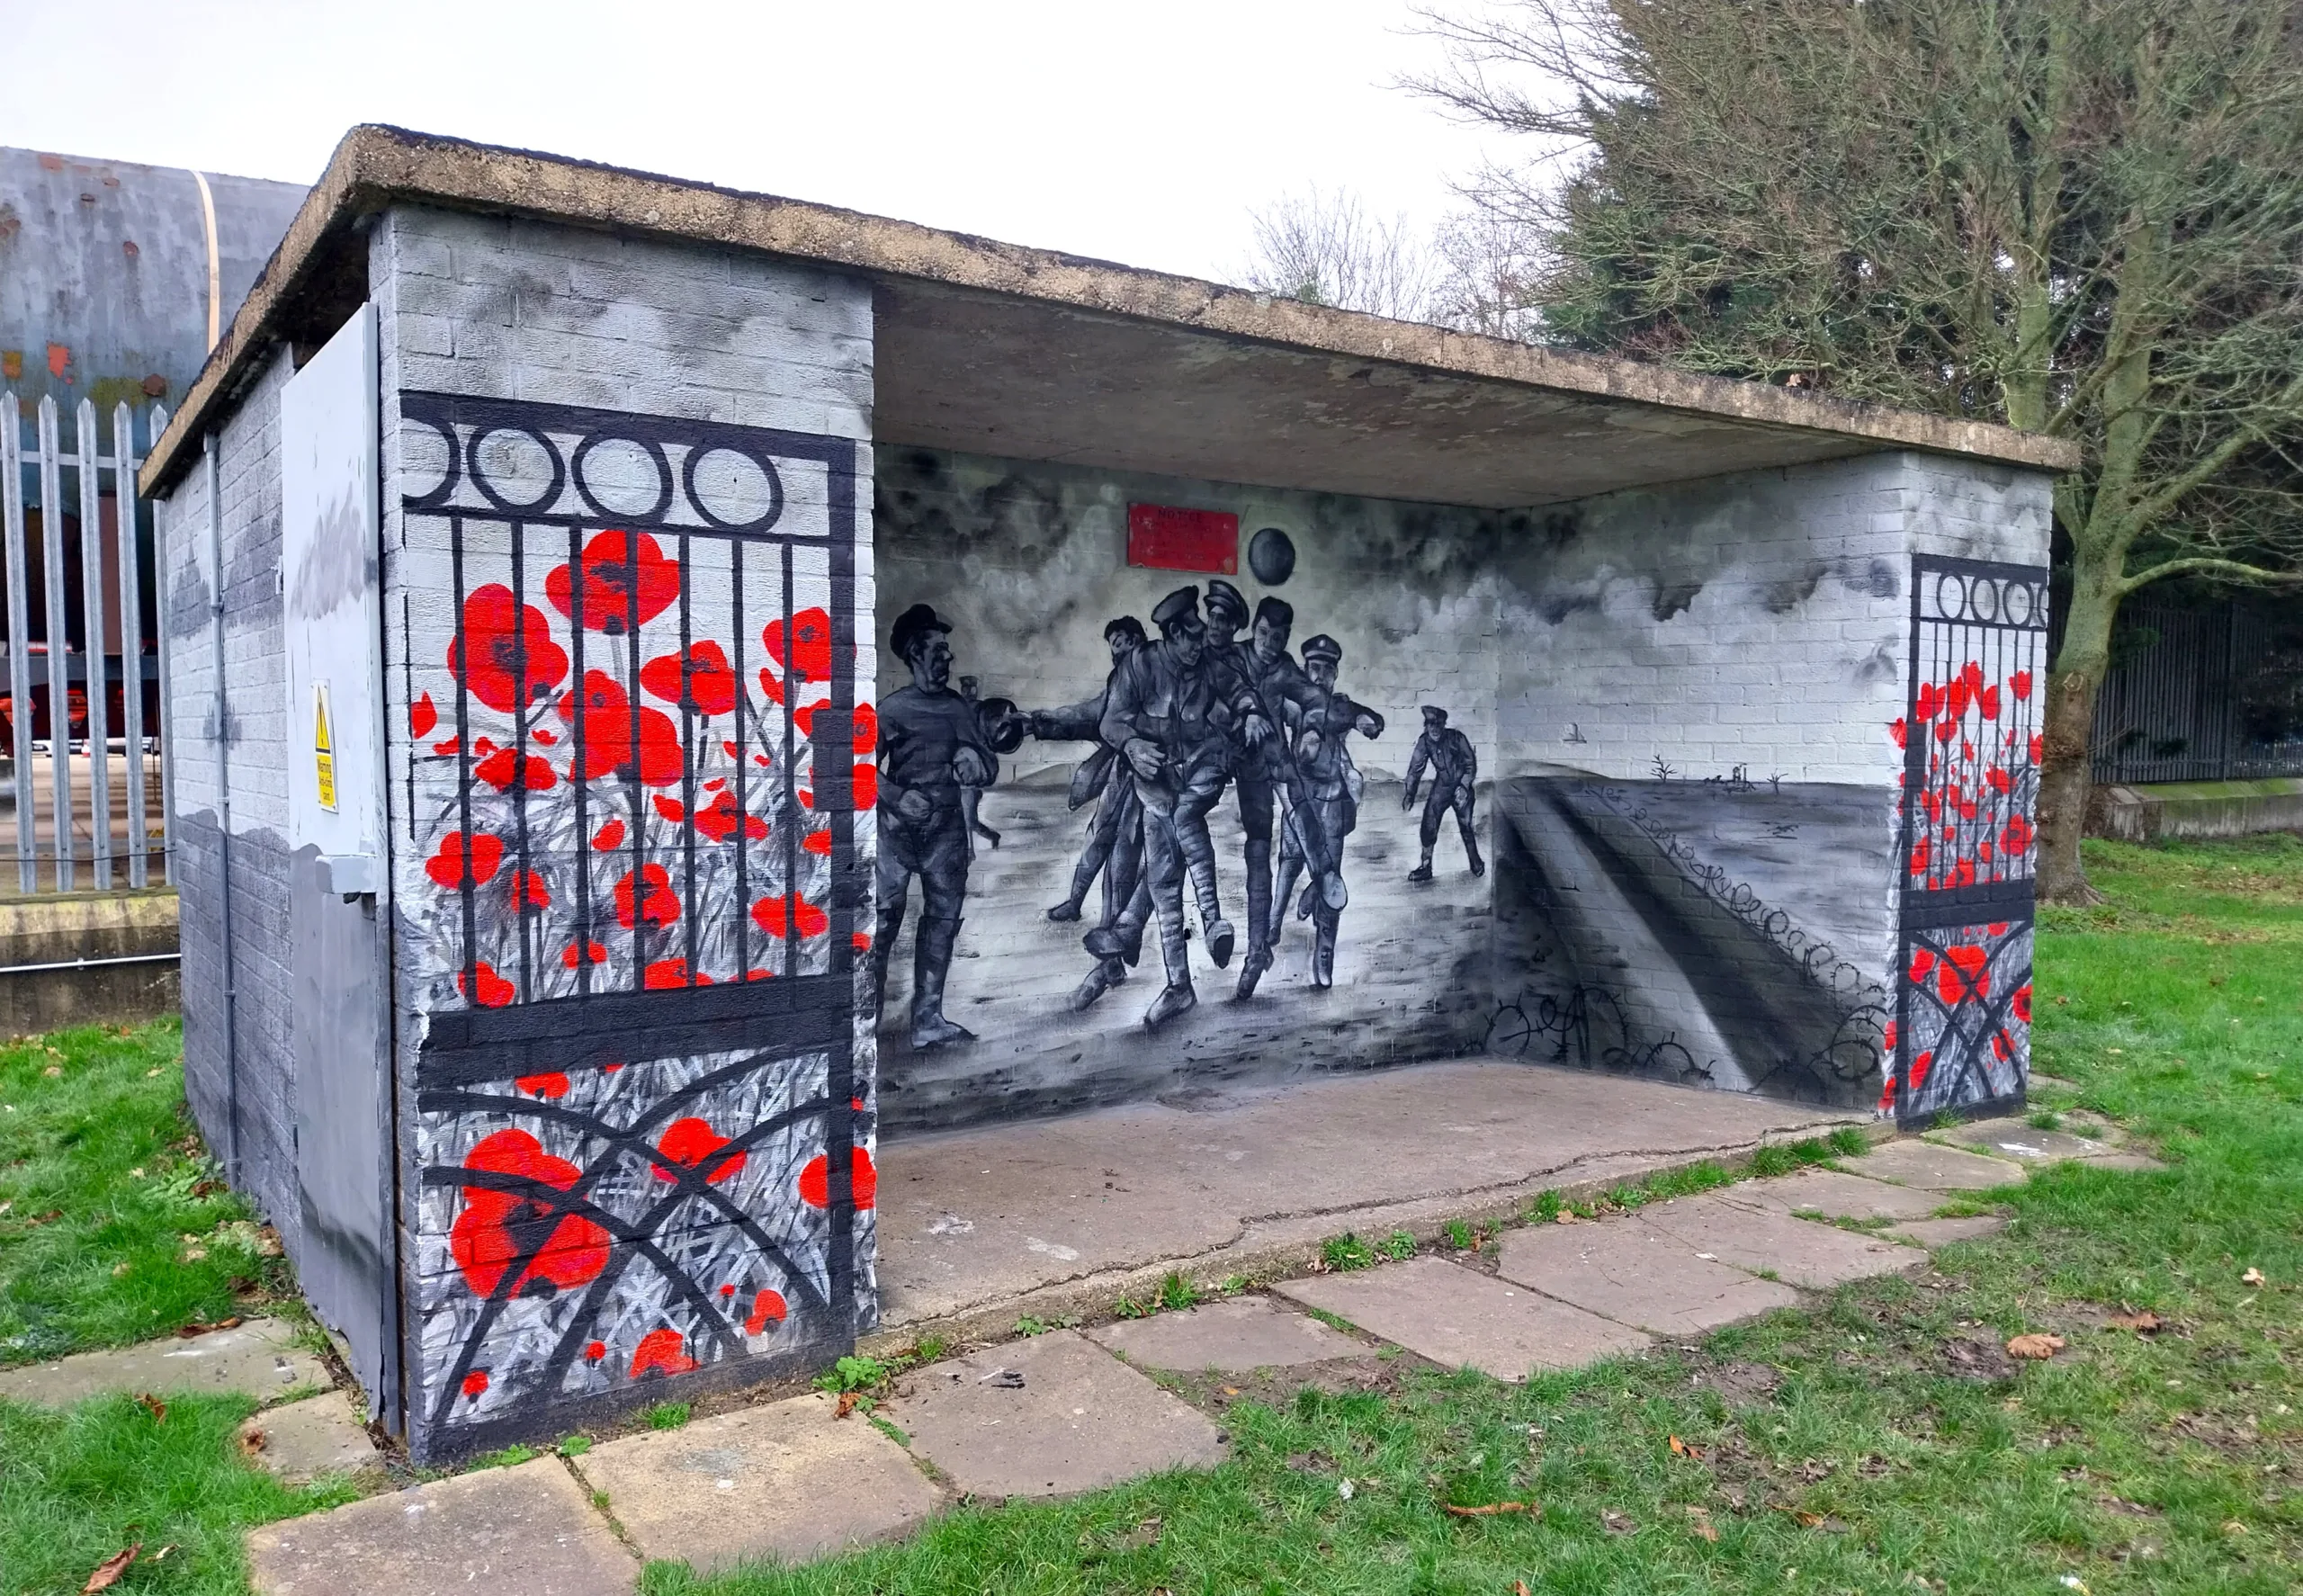 Maureen Davis of Wimblington Parish Council successfully applied for funding to commission a local artist to paint the pavilion and toilet block at the War Memorial Playing Field with graffiti-style murals, and work with young people in the community to see what murals they would like to see.